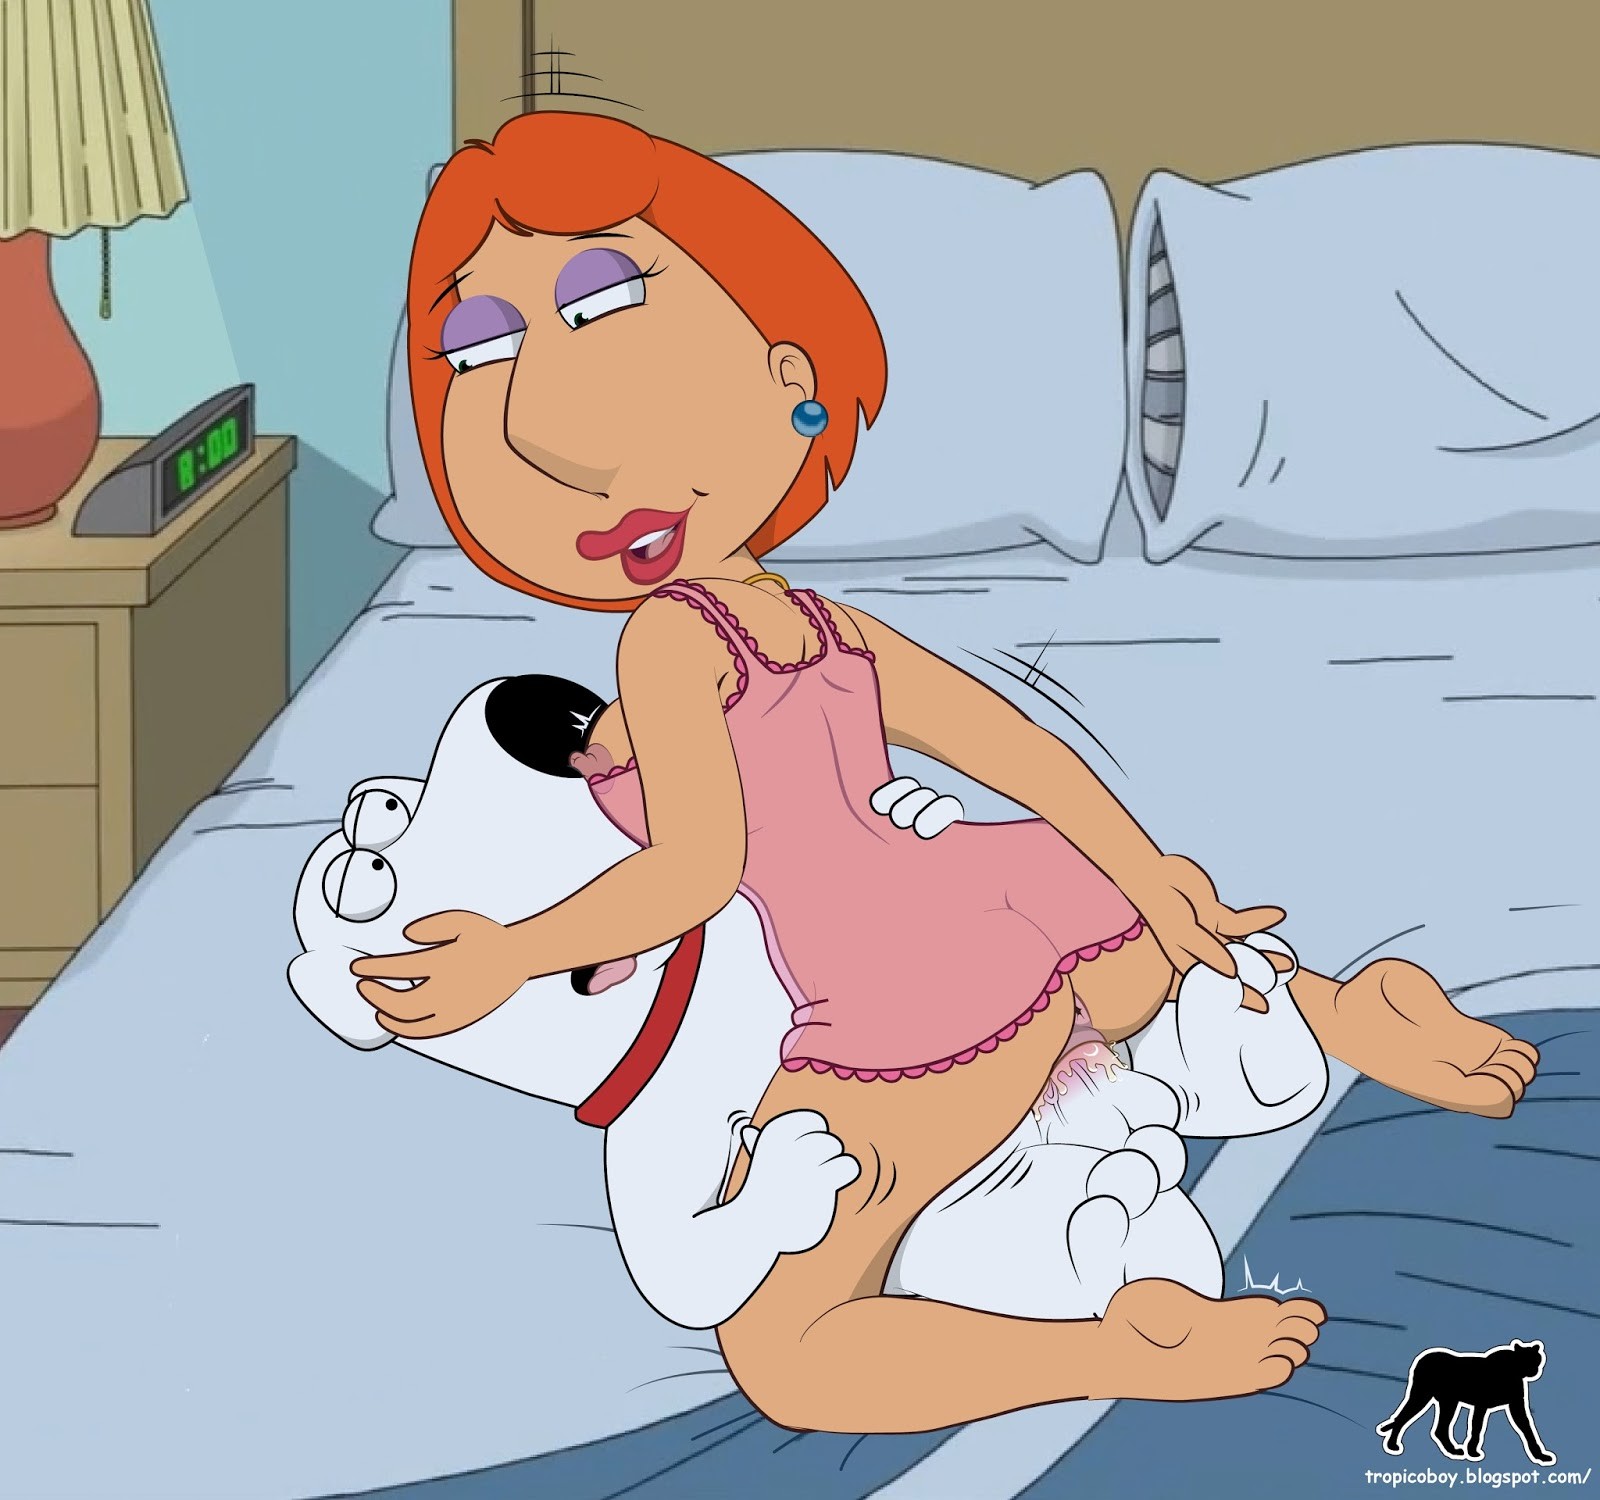 on. by. interracial. cheating wife. on Slut Wife Lois Griffin from Family G...